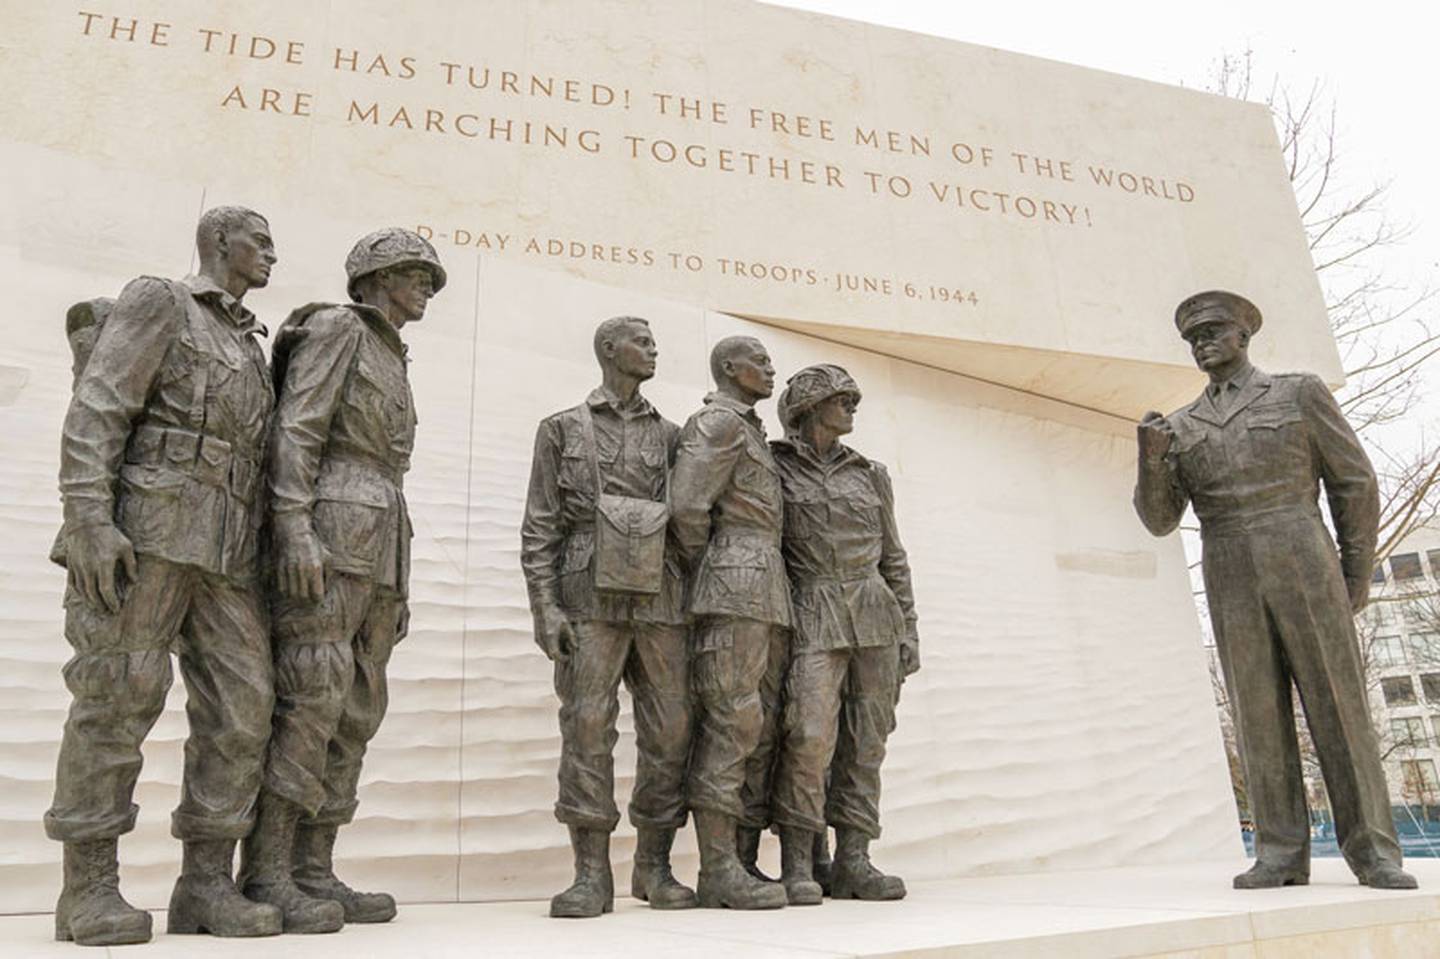 Statues at the Dwight D. Eisenhower Memorial in Washington D.C. depict the general visiting troops a day before the Normandy invasion in 1944.